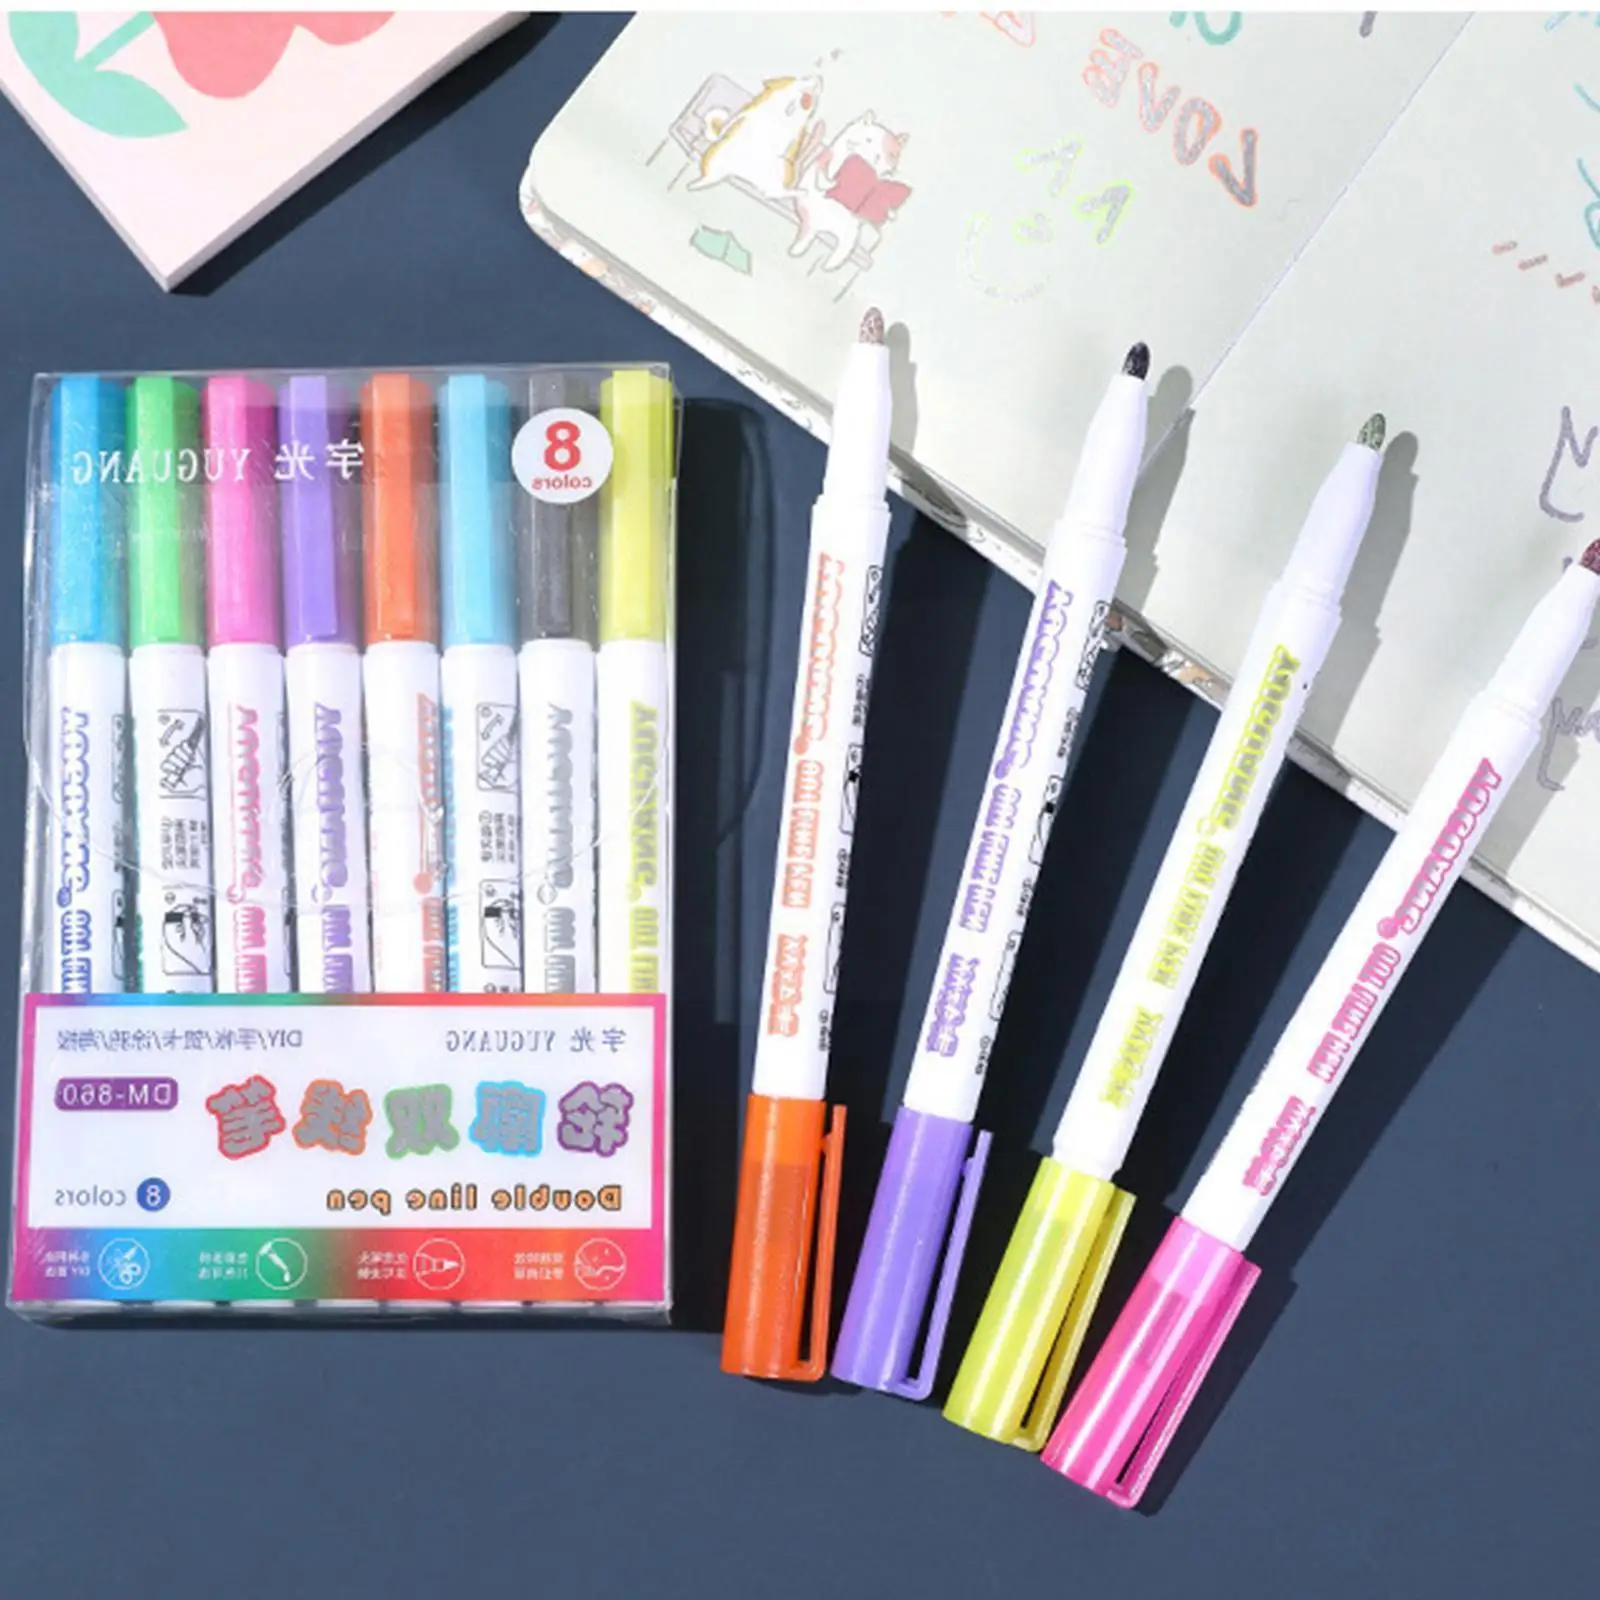 

Highlighter Marker Pen Drawing Double Lines Outline Office Writing Colors Fluency School Stationery Pen Scrapbooking DIY Pe F5M5